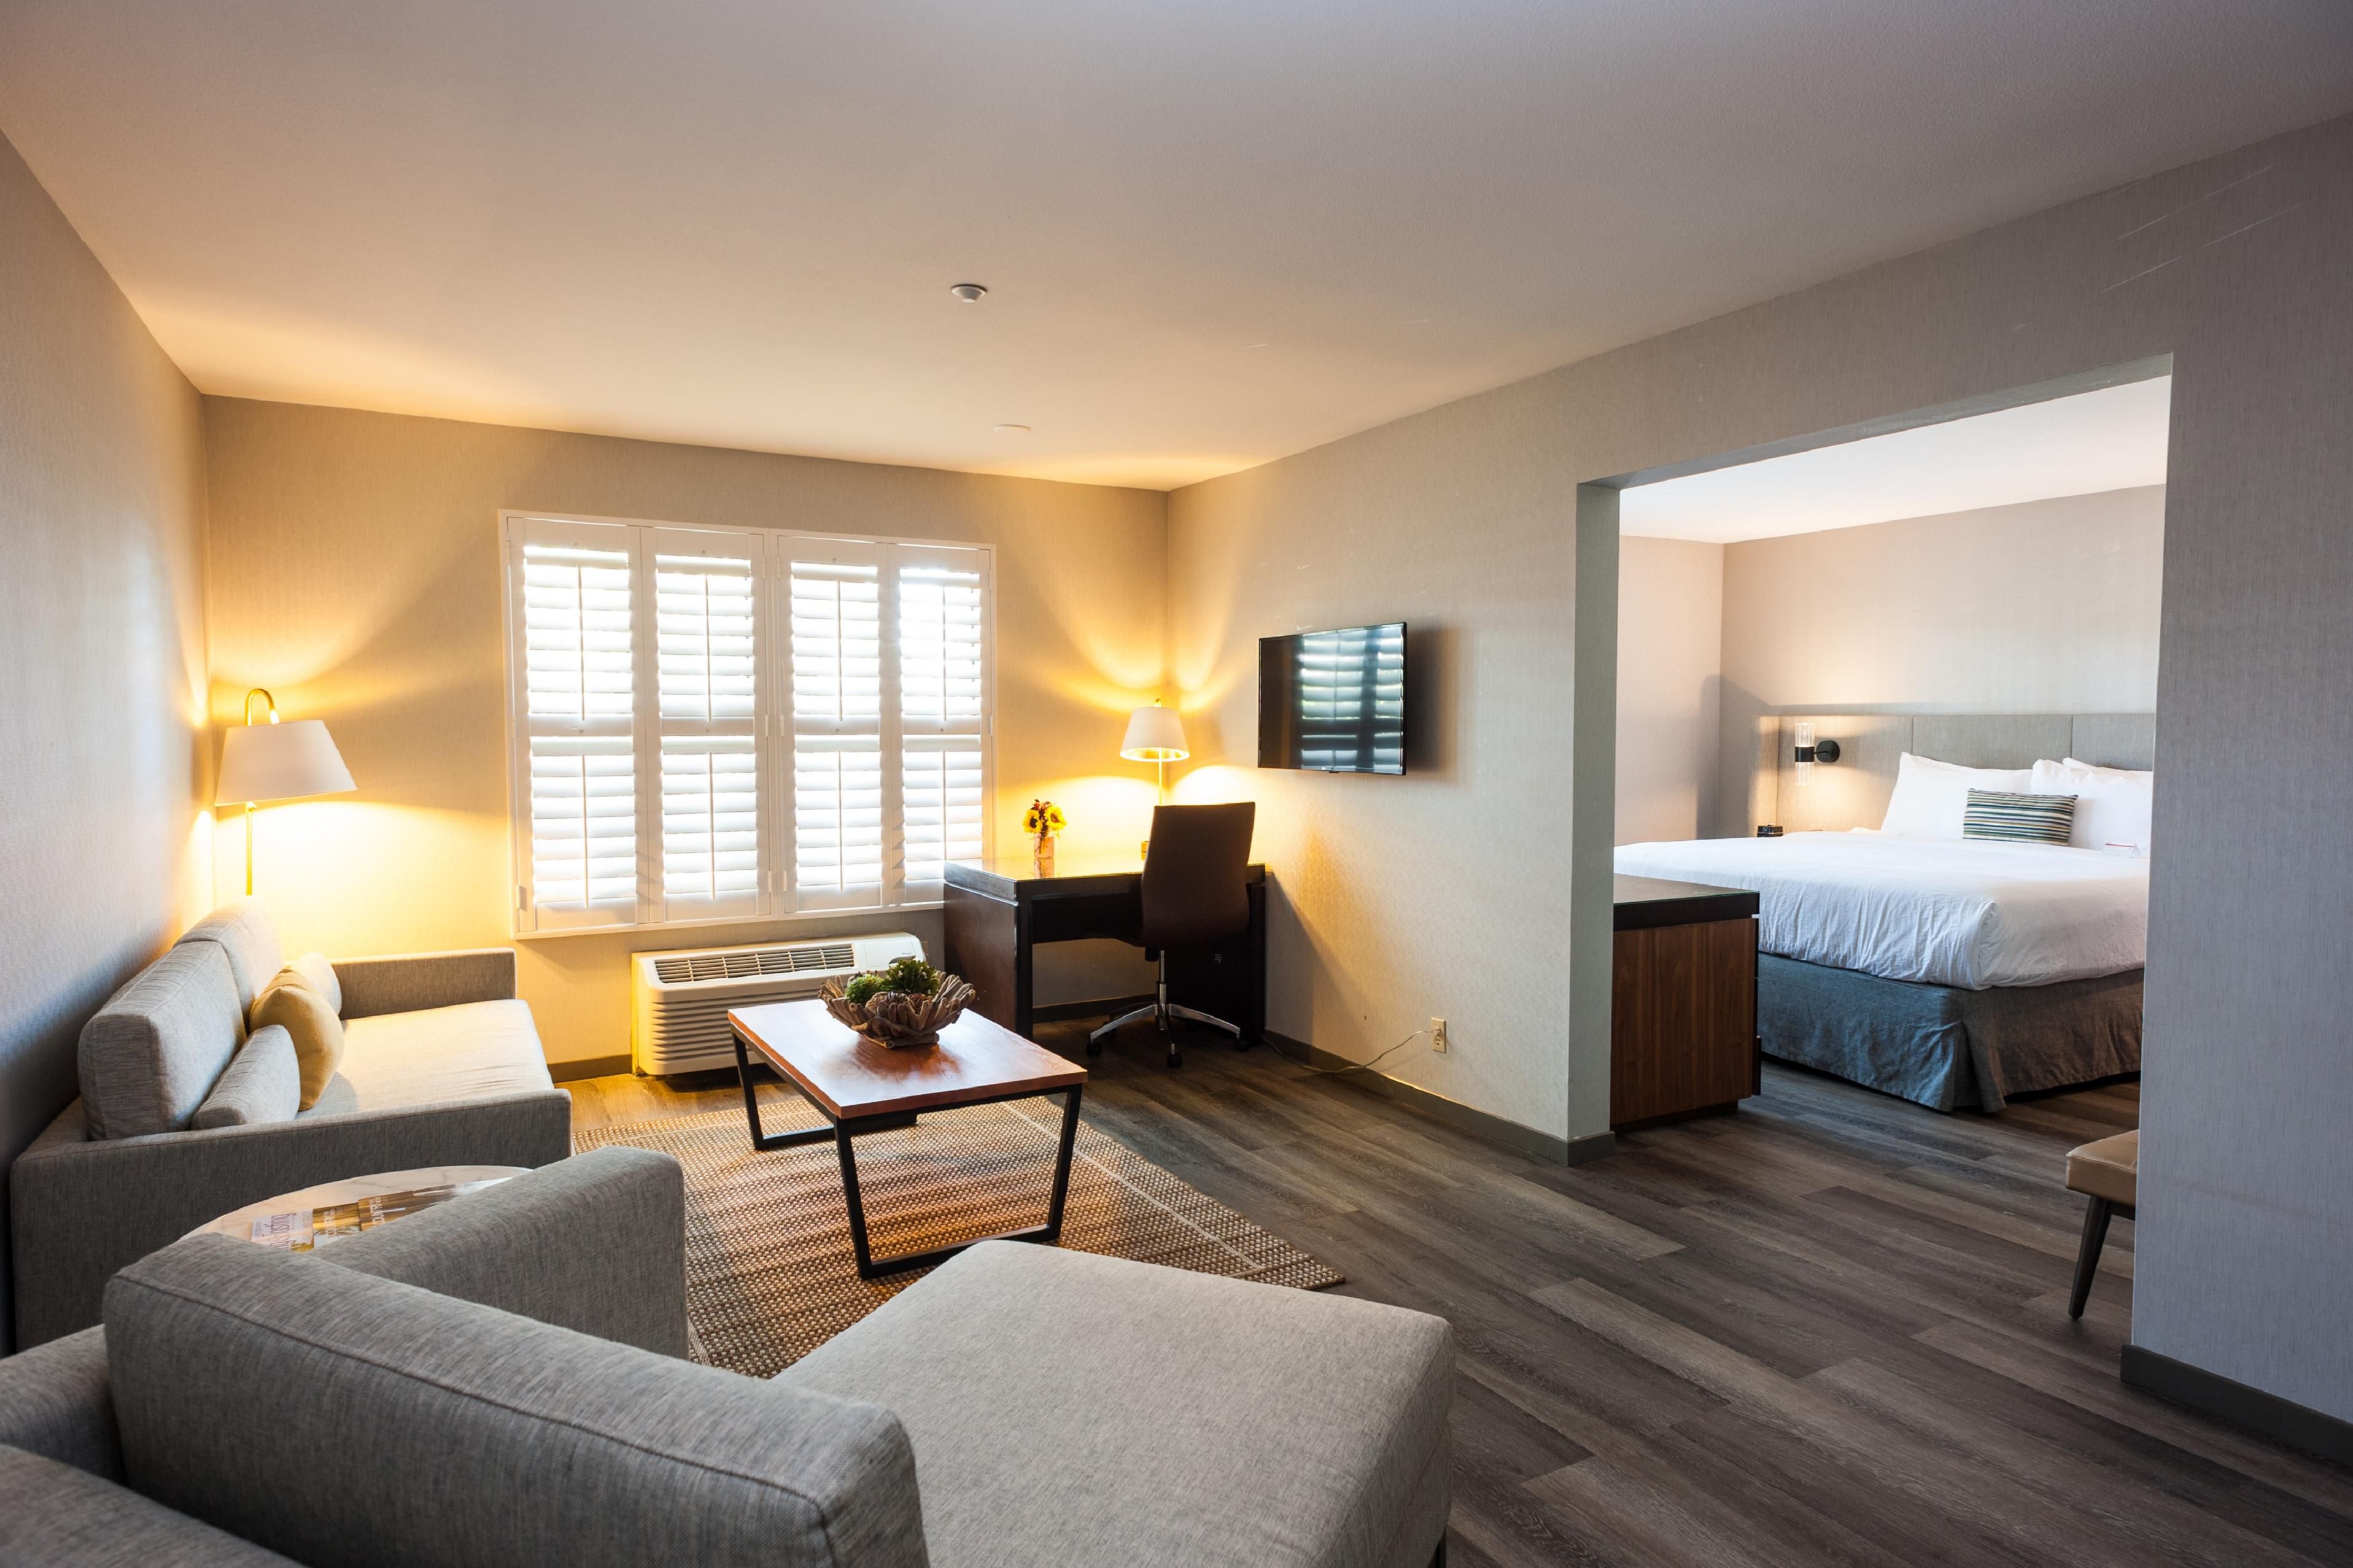 Our guest rooms are a home away from home, boasting plush beds, a lounge area, hardwood floors, and plantation shutters, all designed for tranquil relaxation. For added convenience, our rooms include refrigerators, Keurig coffee makers, and in-room safes, ensuring a seamless stay in Napa Valley. 